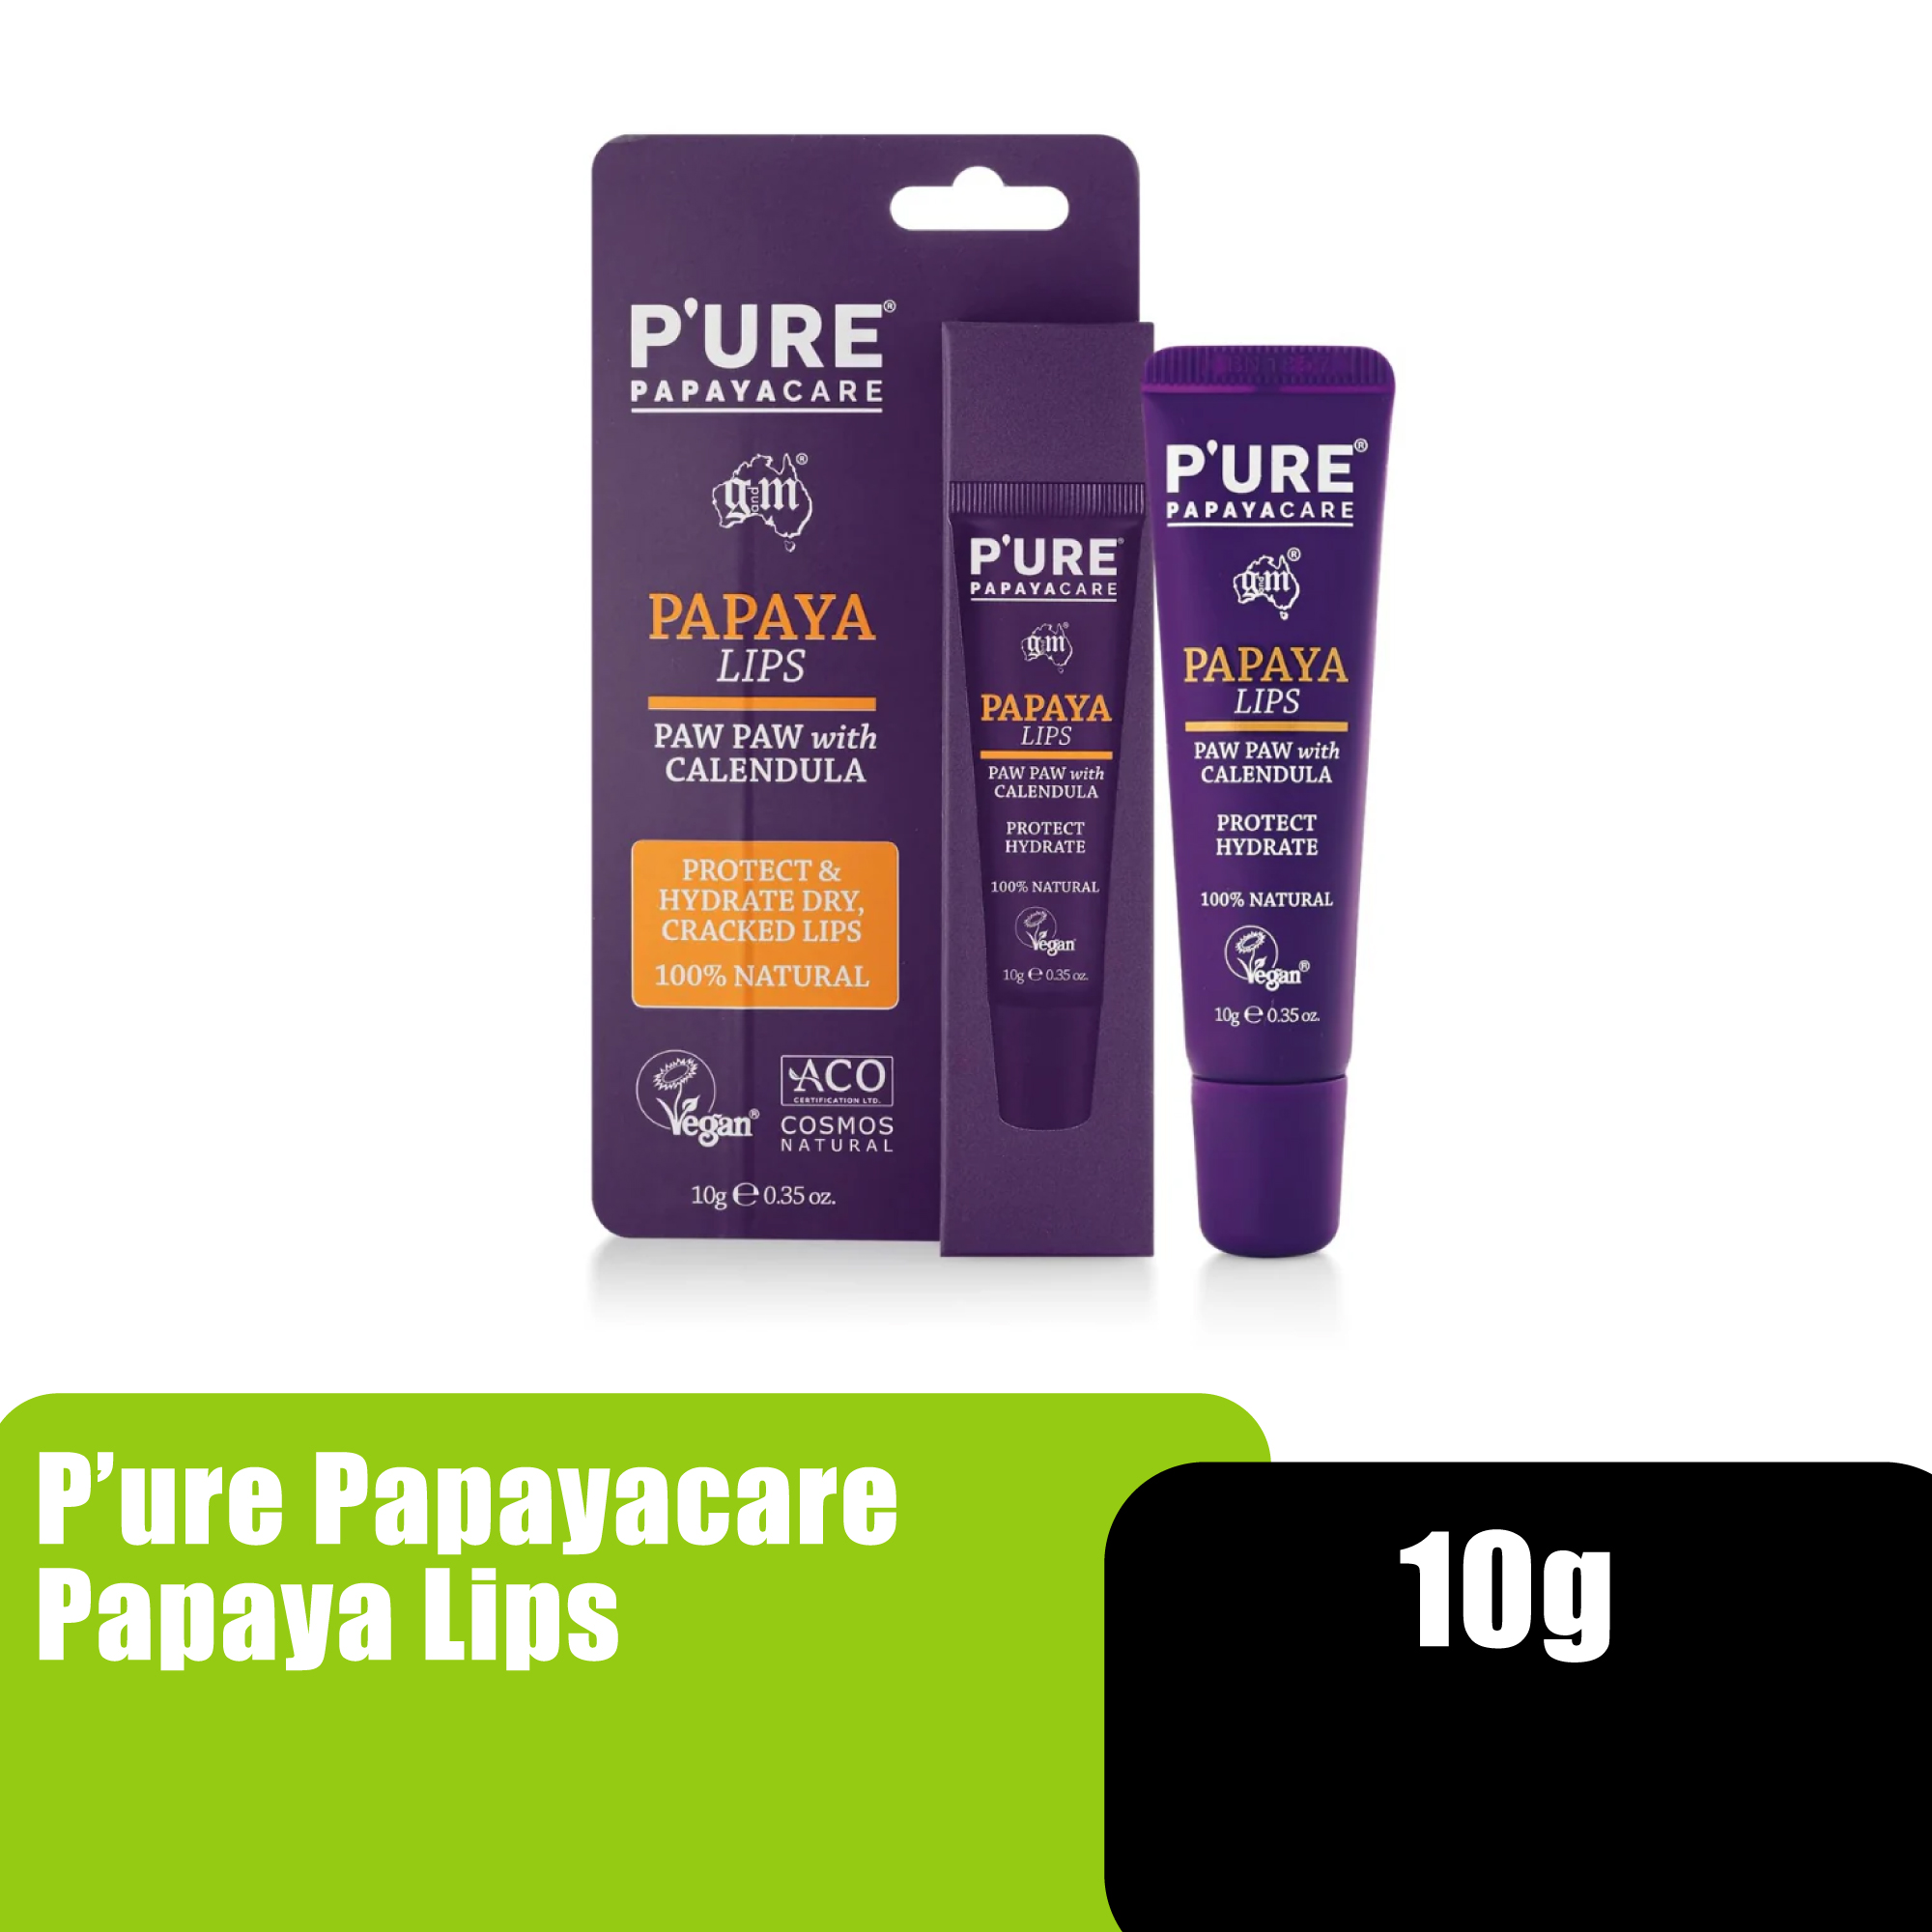 Pure Papayacare Vegan Lip Balm for Dry Lips, with Jojoba Oil, and Candelilla Wax for Hydrating (润唇膏) - 10g